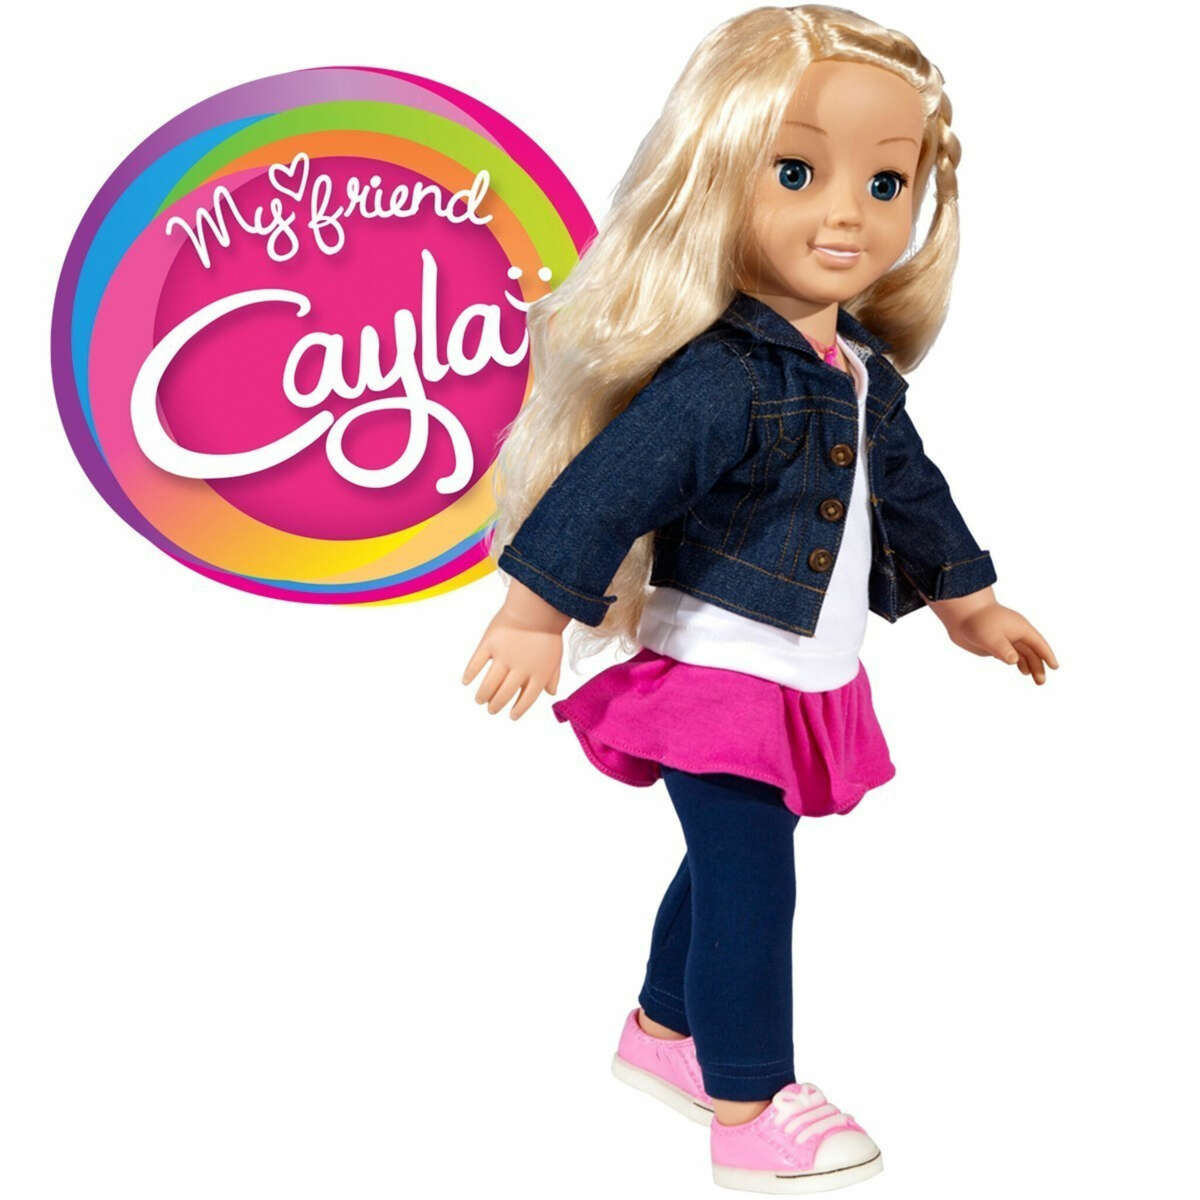 In 2017, German officials called the My Friend Cayla doll an illegal "espionage device" and asked parents to disable it. (Genesis/PRNewsFoto)